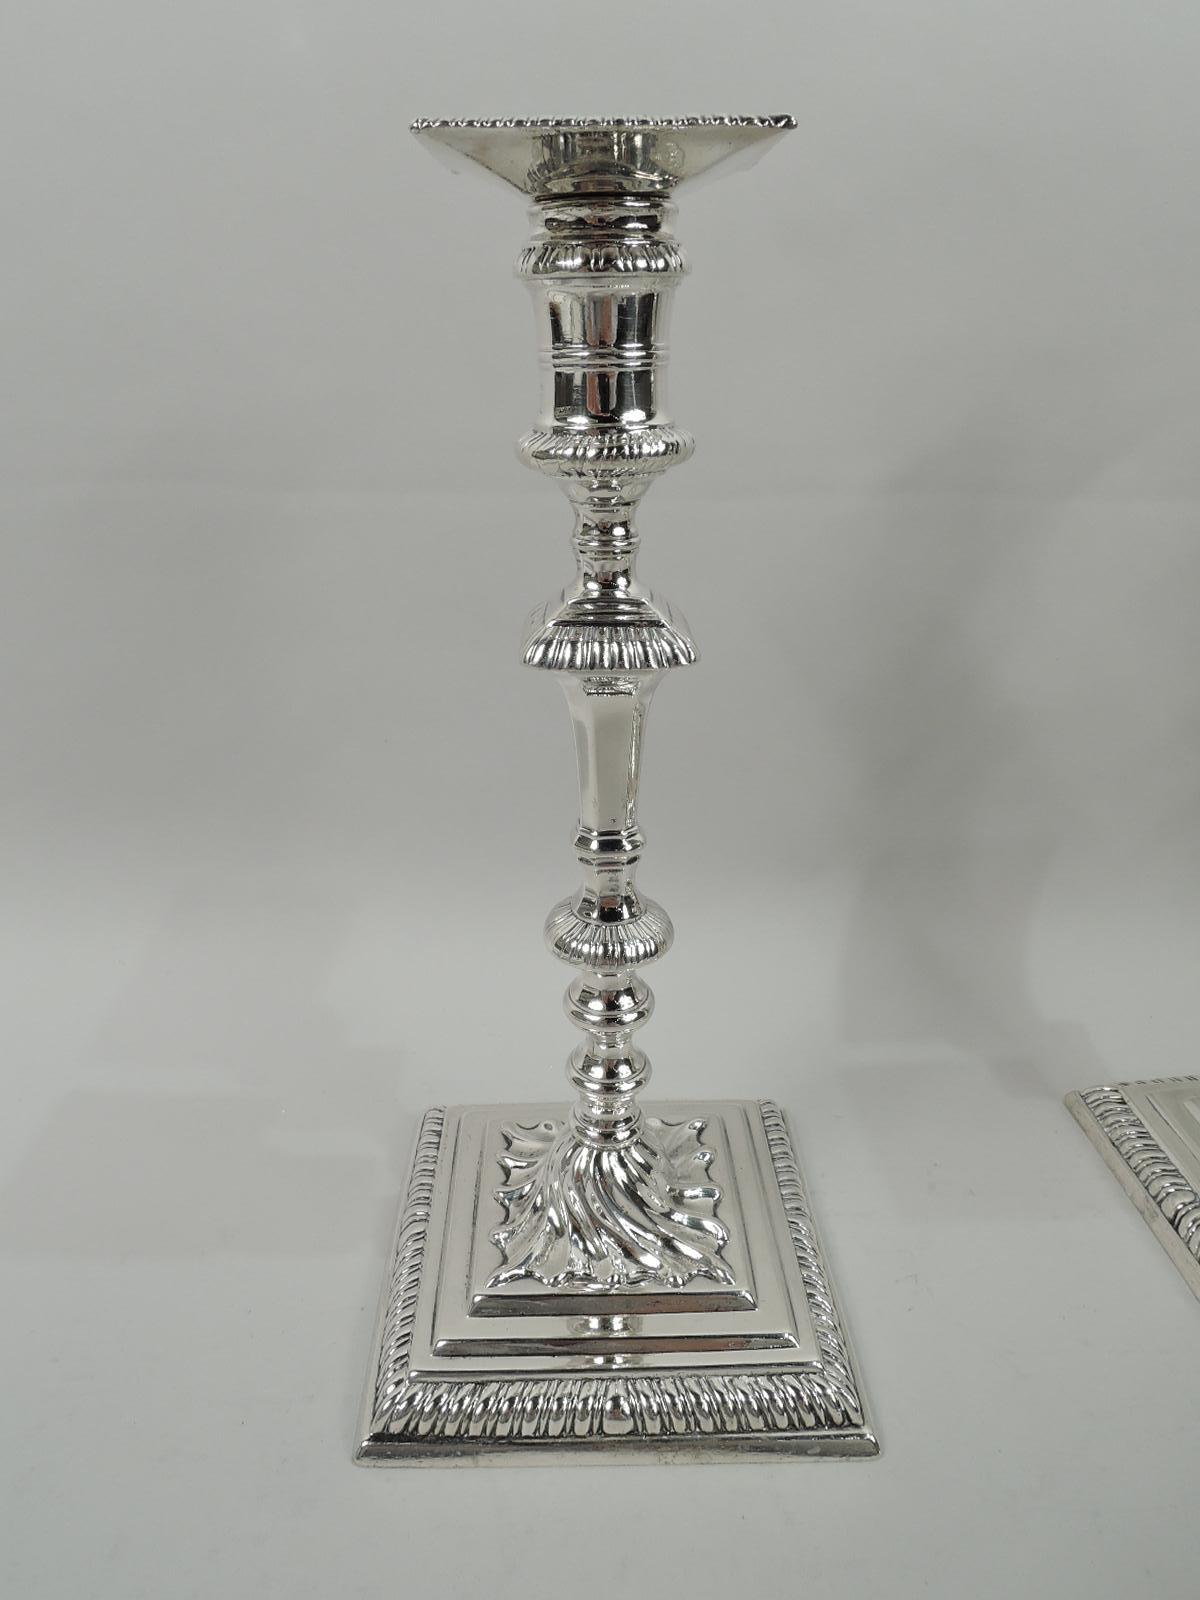 Two pairs of English Georgian sterling silver candlesticks, mid-18th century. Each: Spool socket with raised reeded girdle and square. Faceted and tapering shaft with flanges and knops flowing into raised foot with twisted fluted mount on stepped